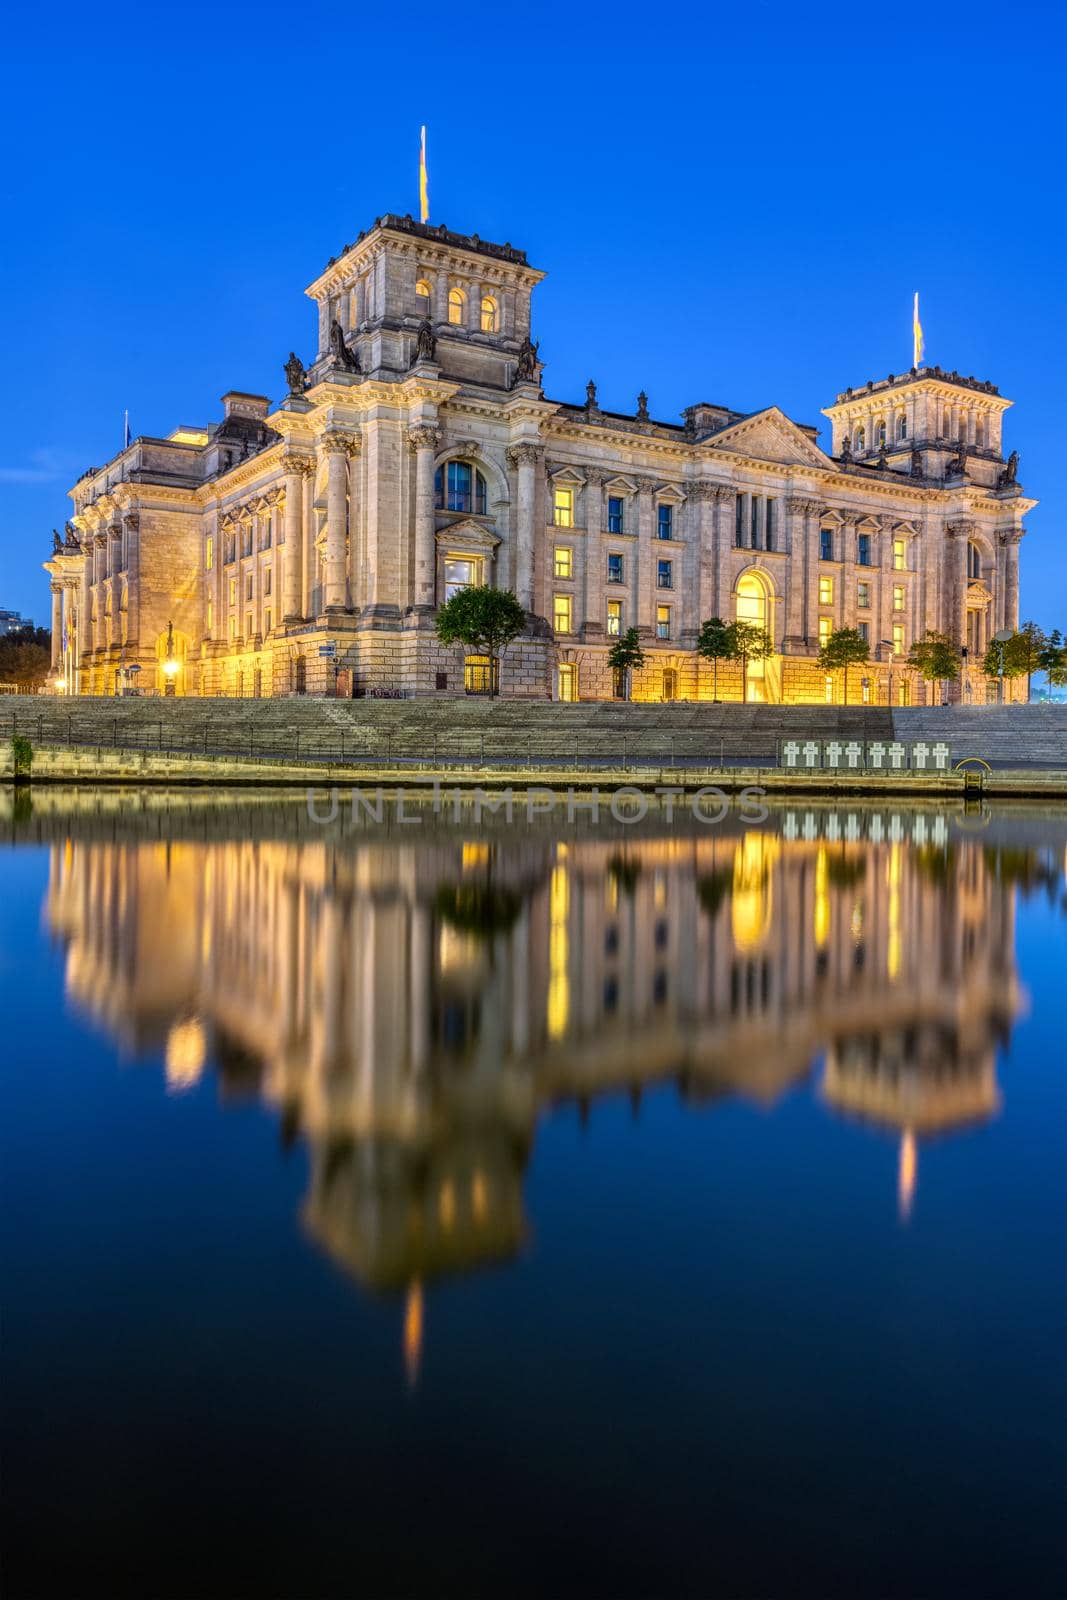 The Reichstag in Berlin at night reflected in the river Spree